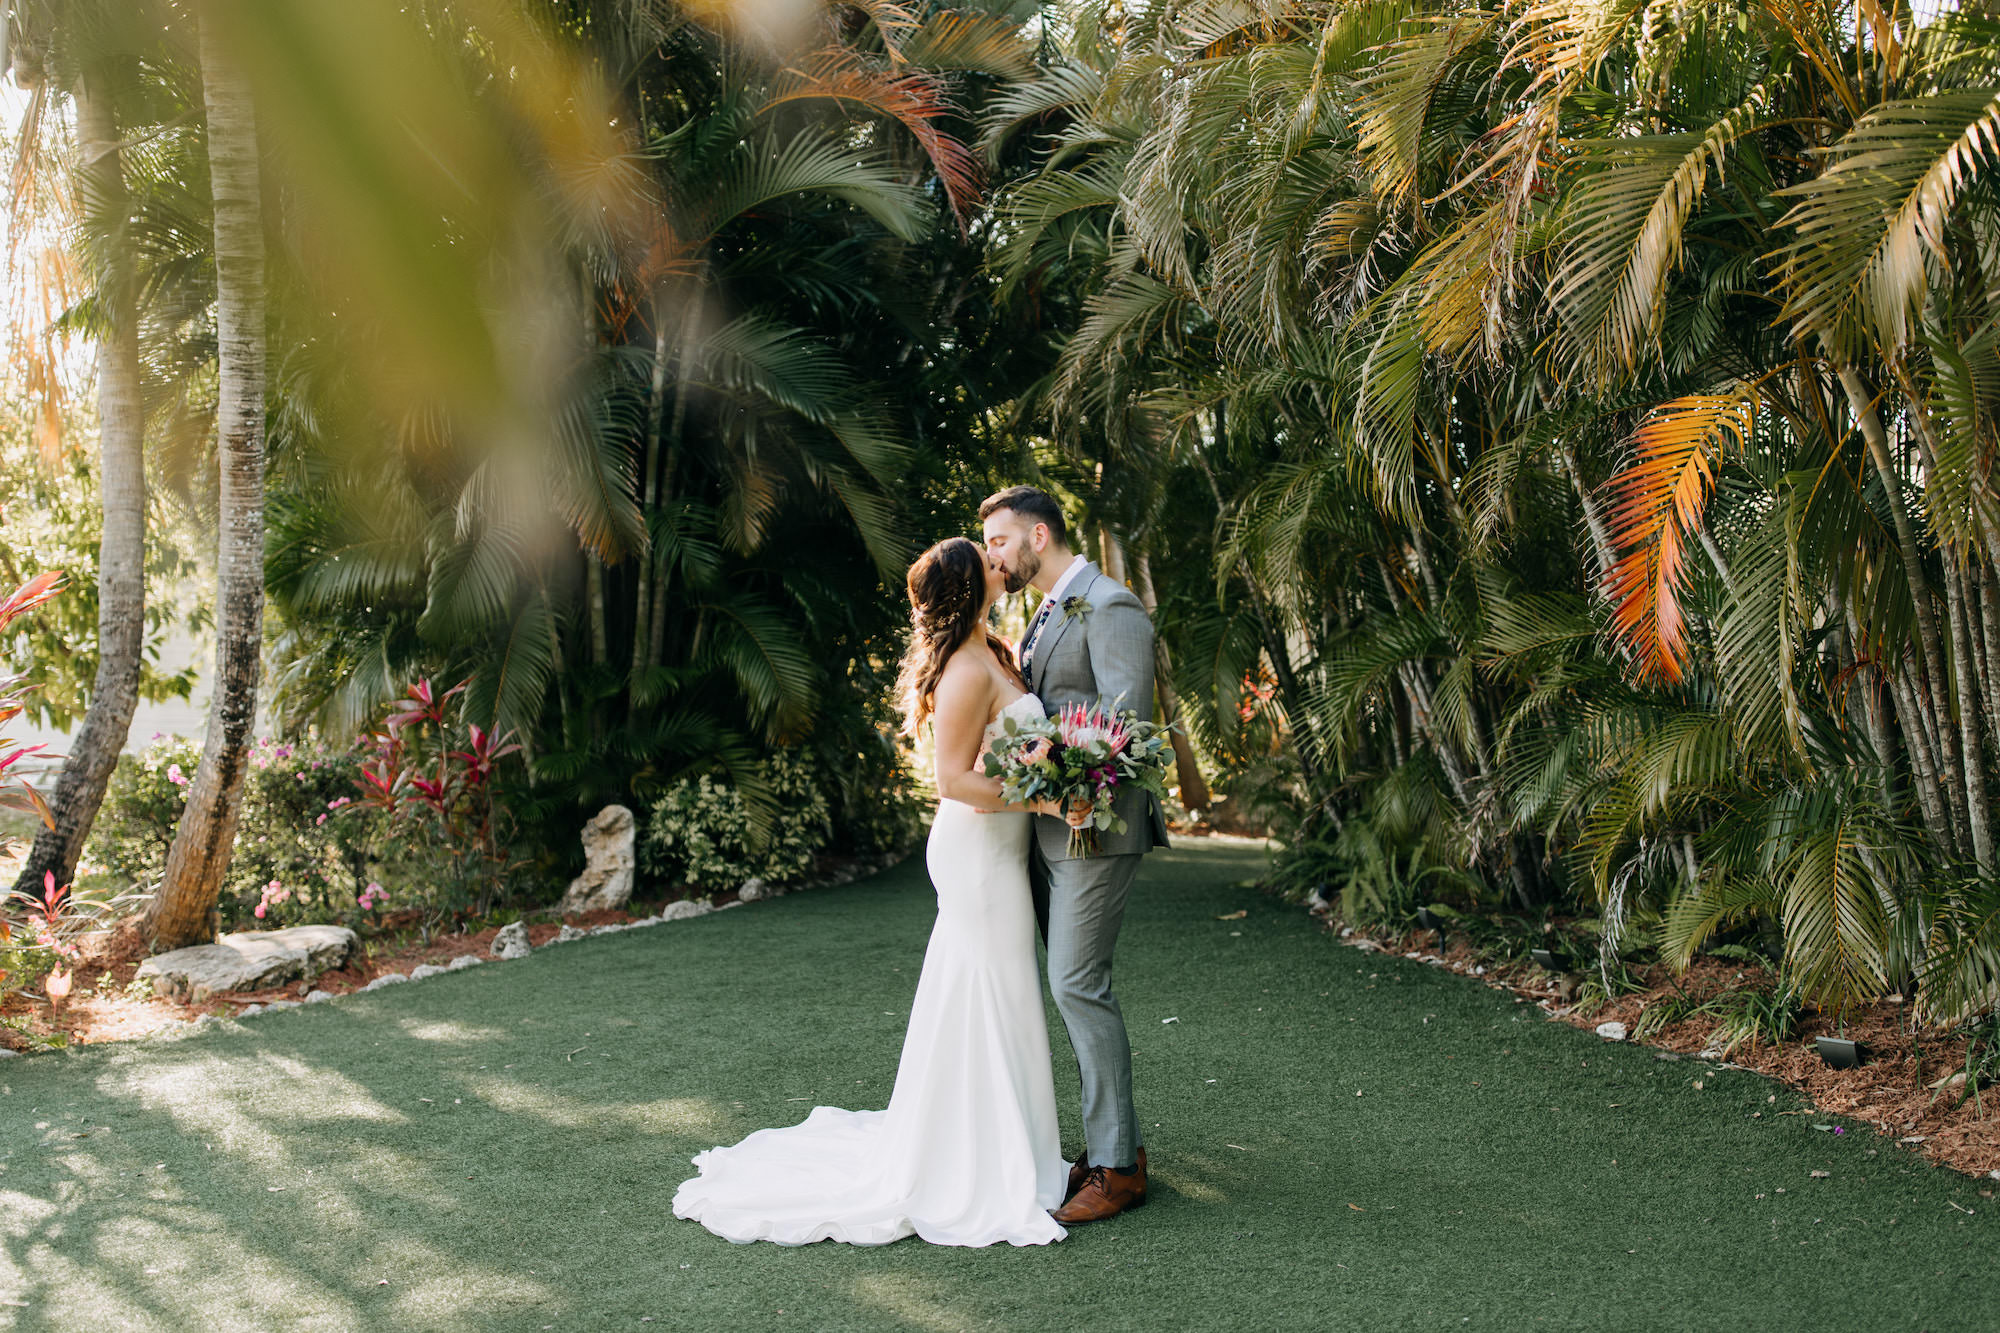 Romantic Bride and Groom Kiss Wedding Portrait | Waterfront Bride and Groom First Look Private Vow Reading Wedding Portrait | Sarasota Wedding Photographer Amber McWhorter Photography